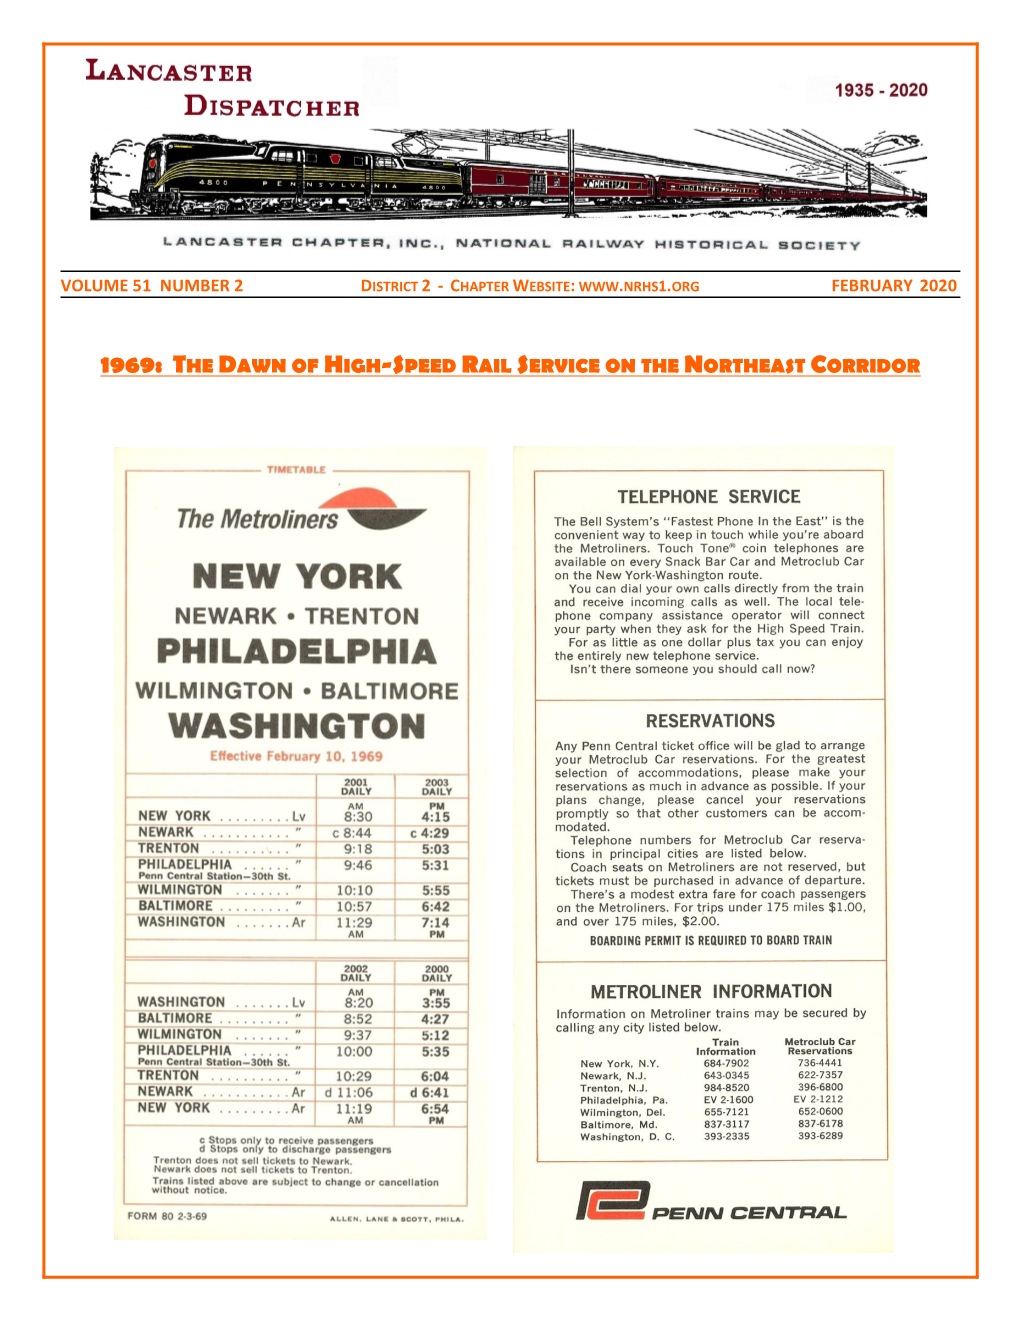 1969: the Dawn of High-Speed Rail Service on the Northeast Corridor Lancaster Dispatcher Page 2 February 2020